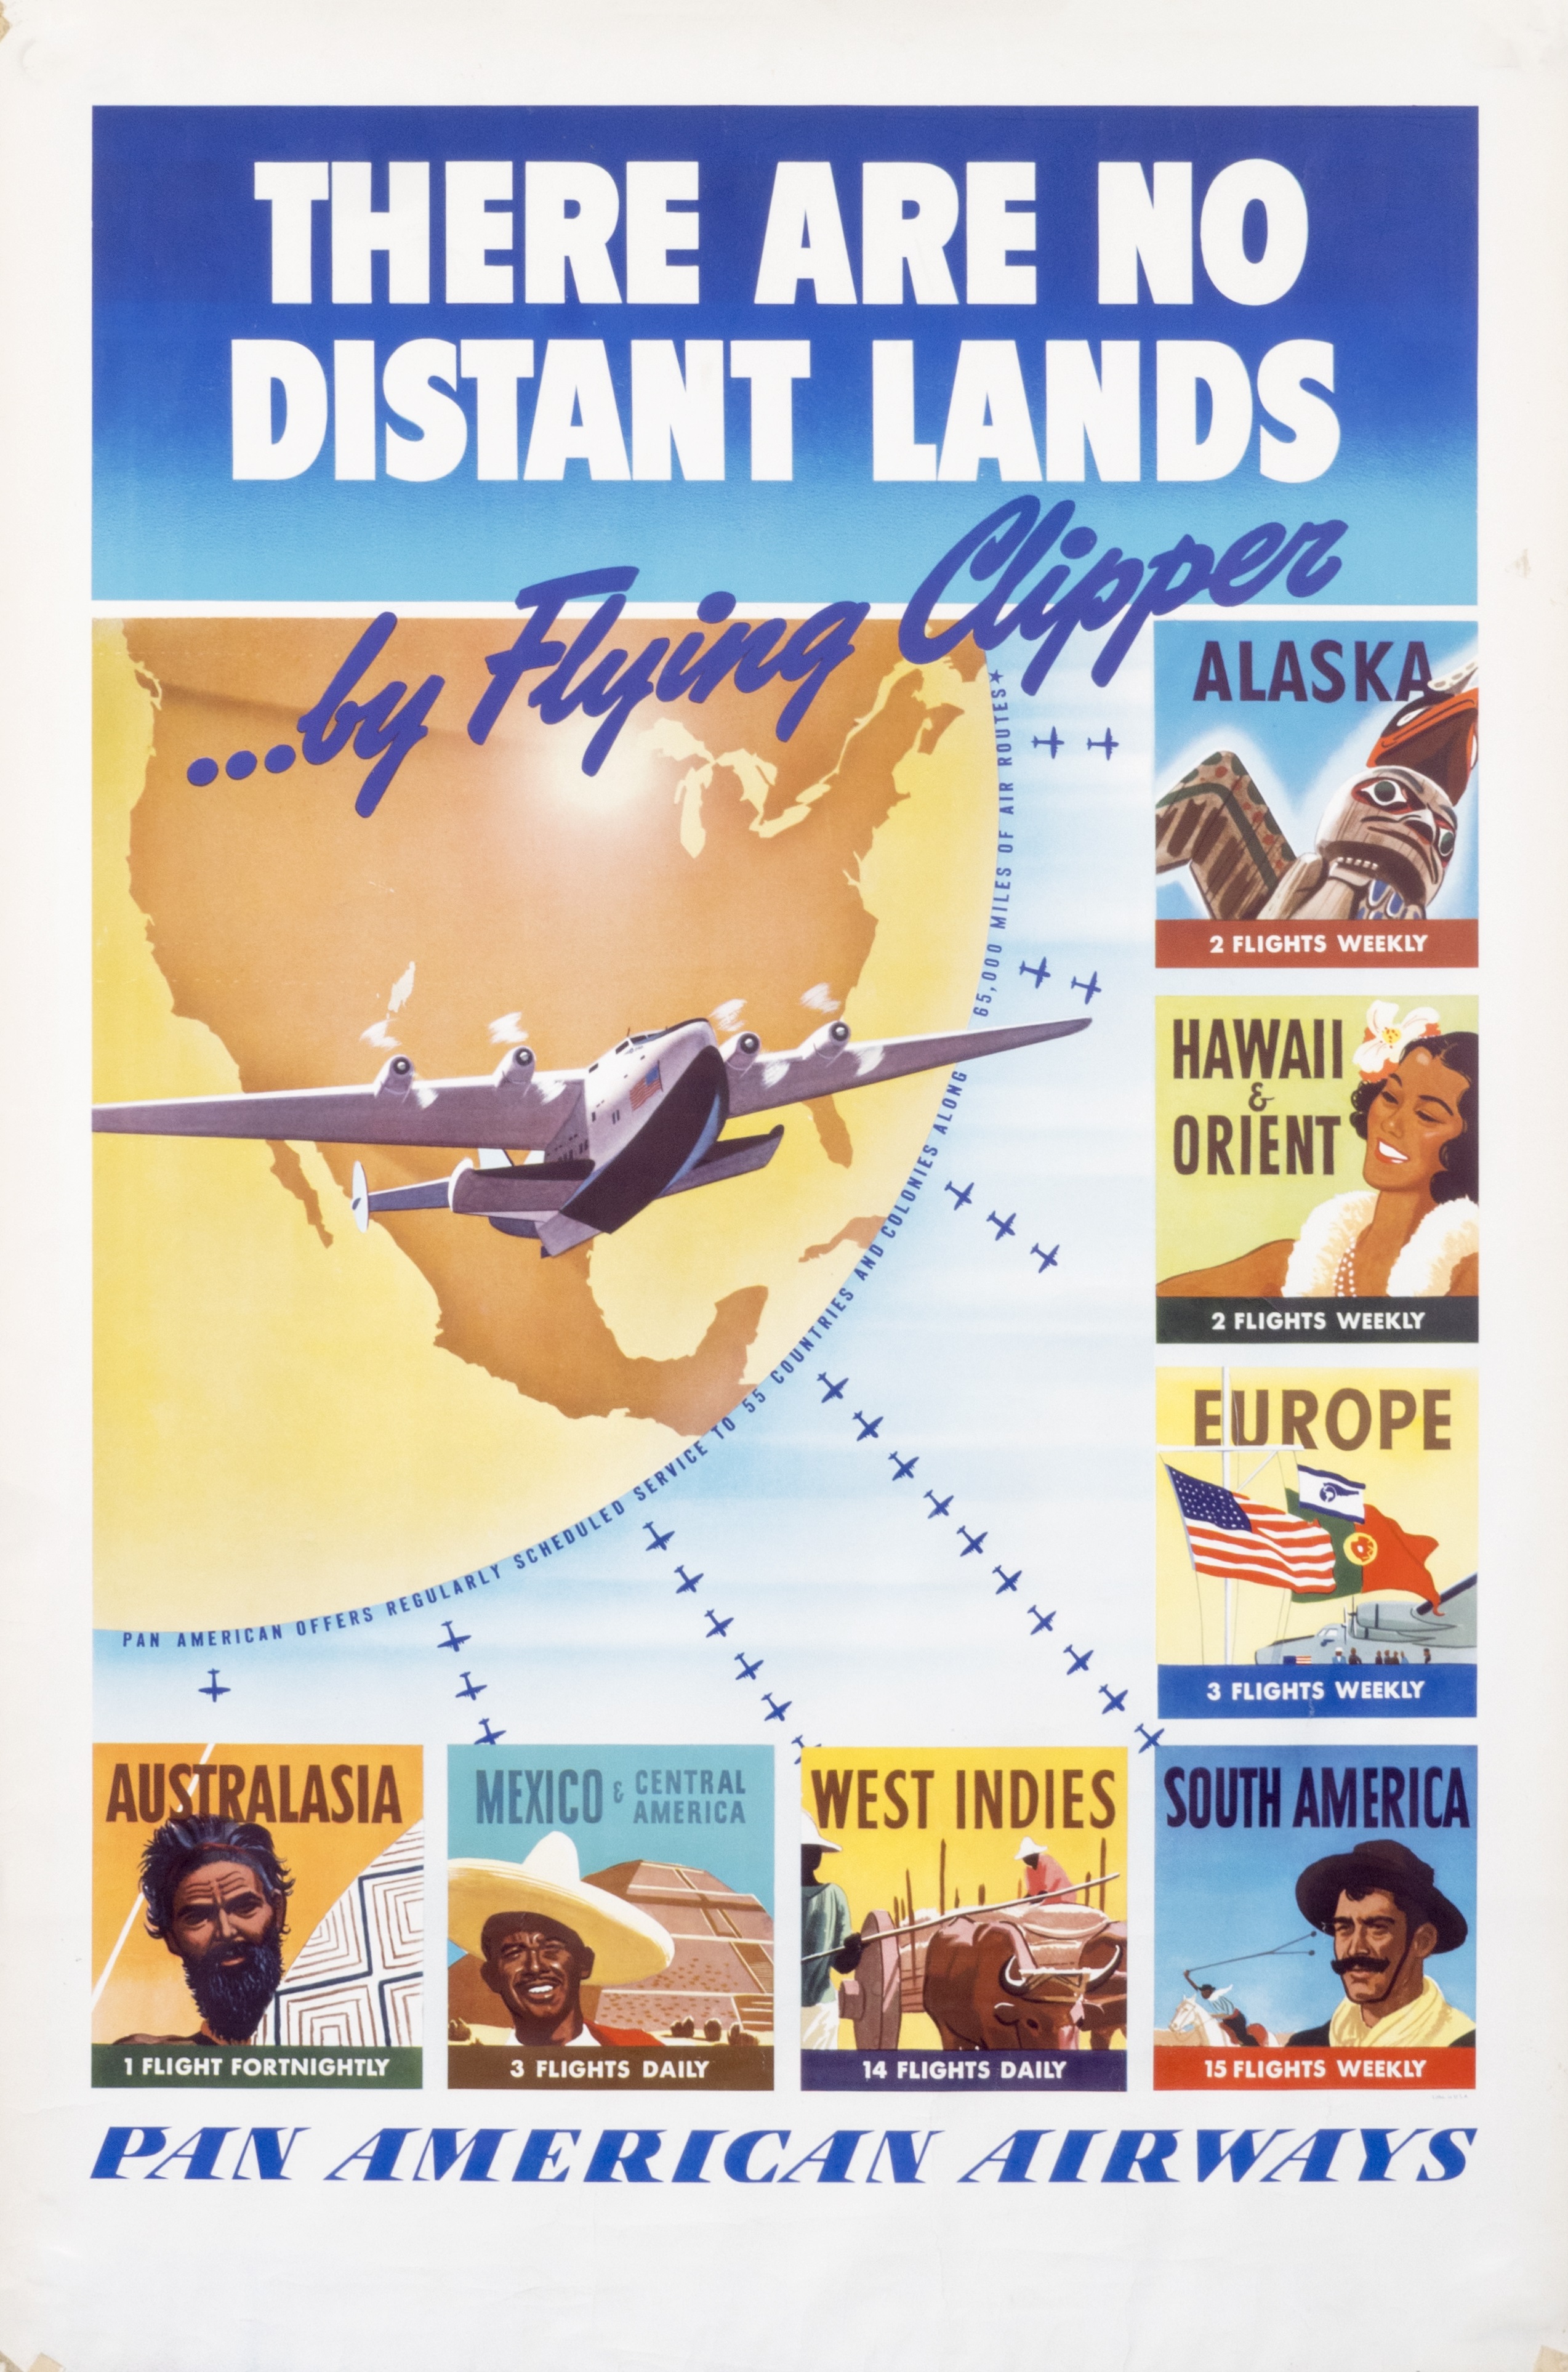 There Are No Distant Lands...by Flying Clipper, artist unknown, c. 1940